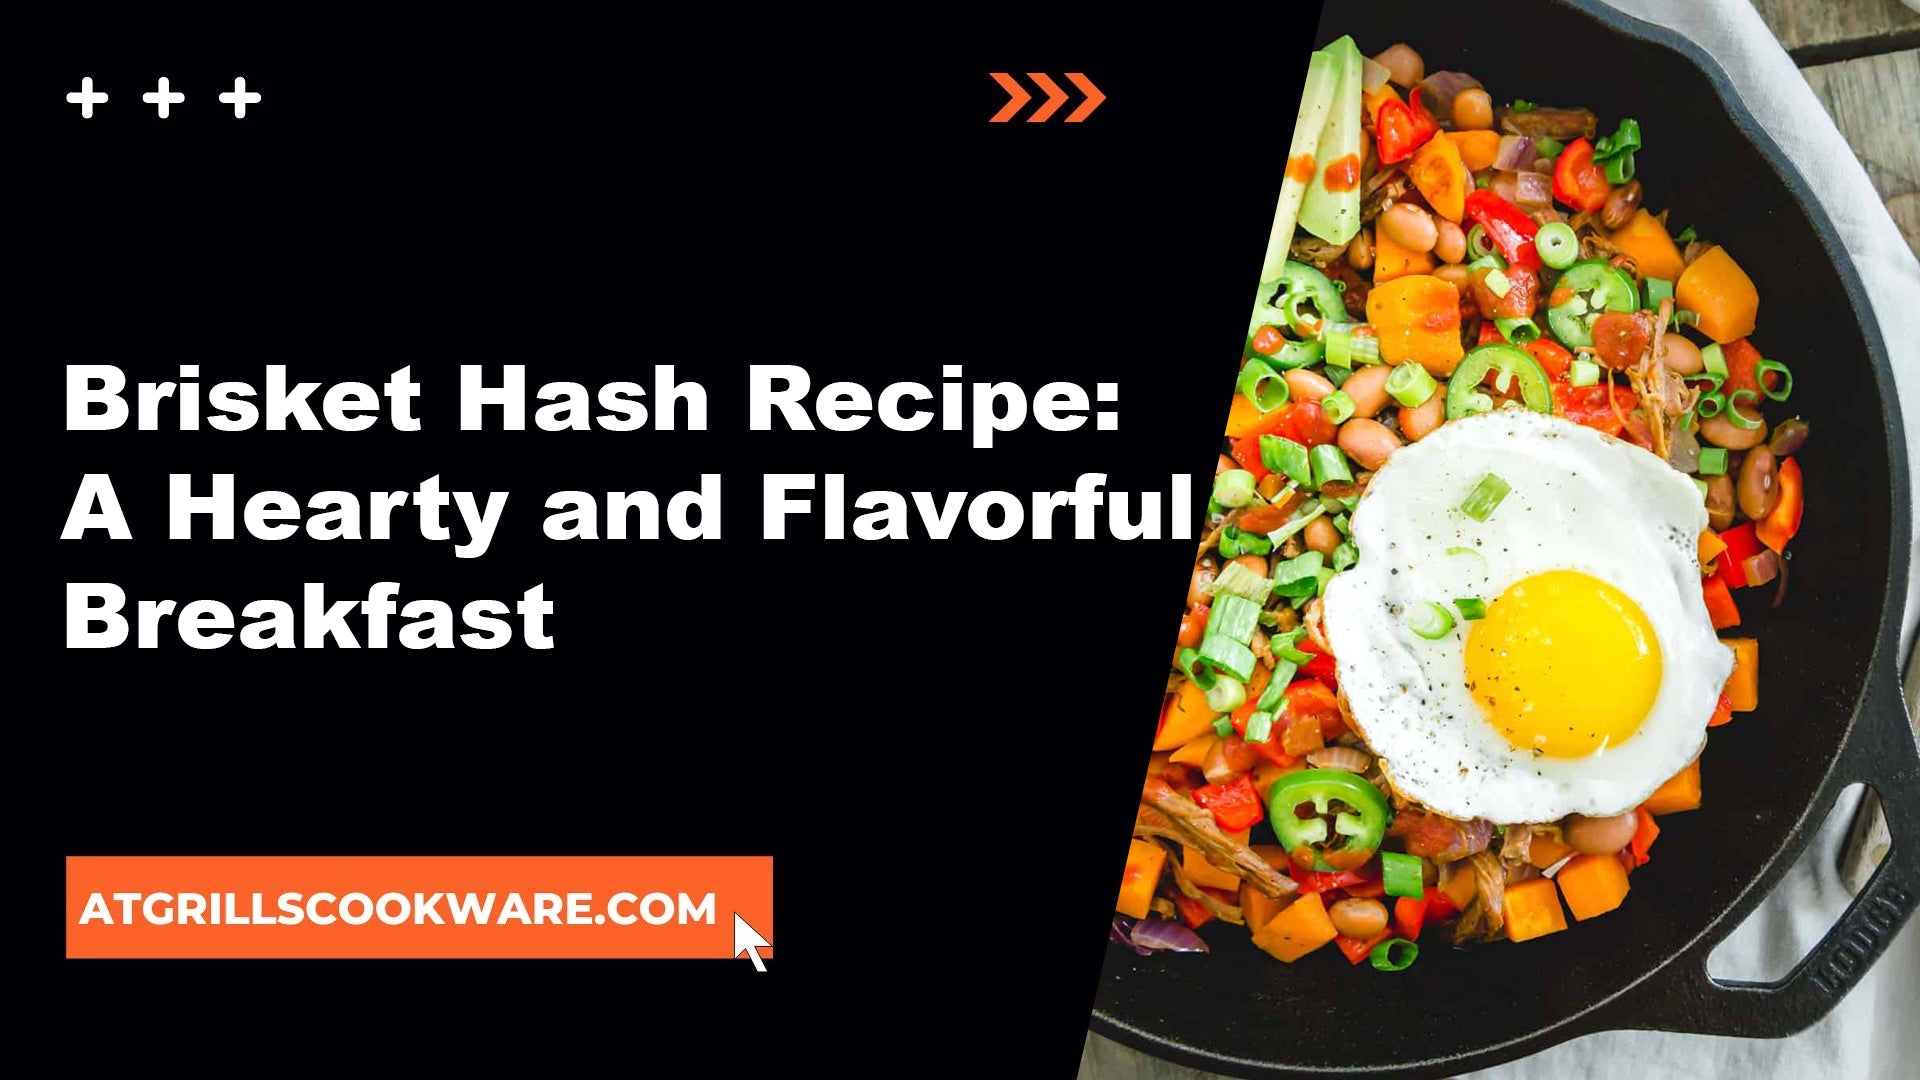 Brisket Hash Recipe: A Hearty and Flavorful Breakfast